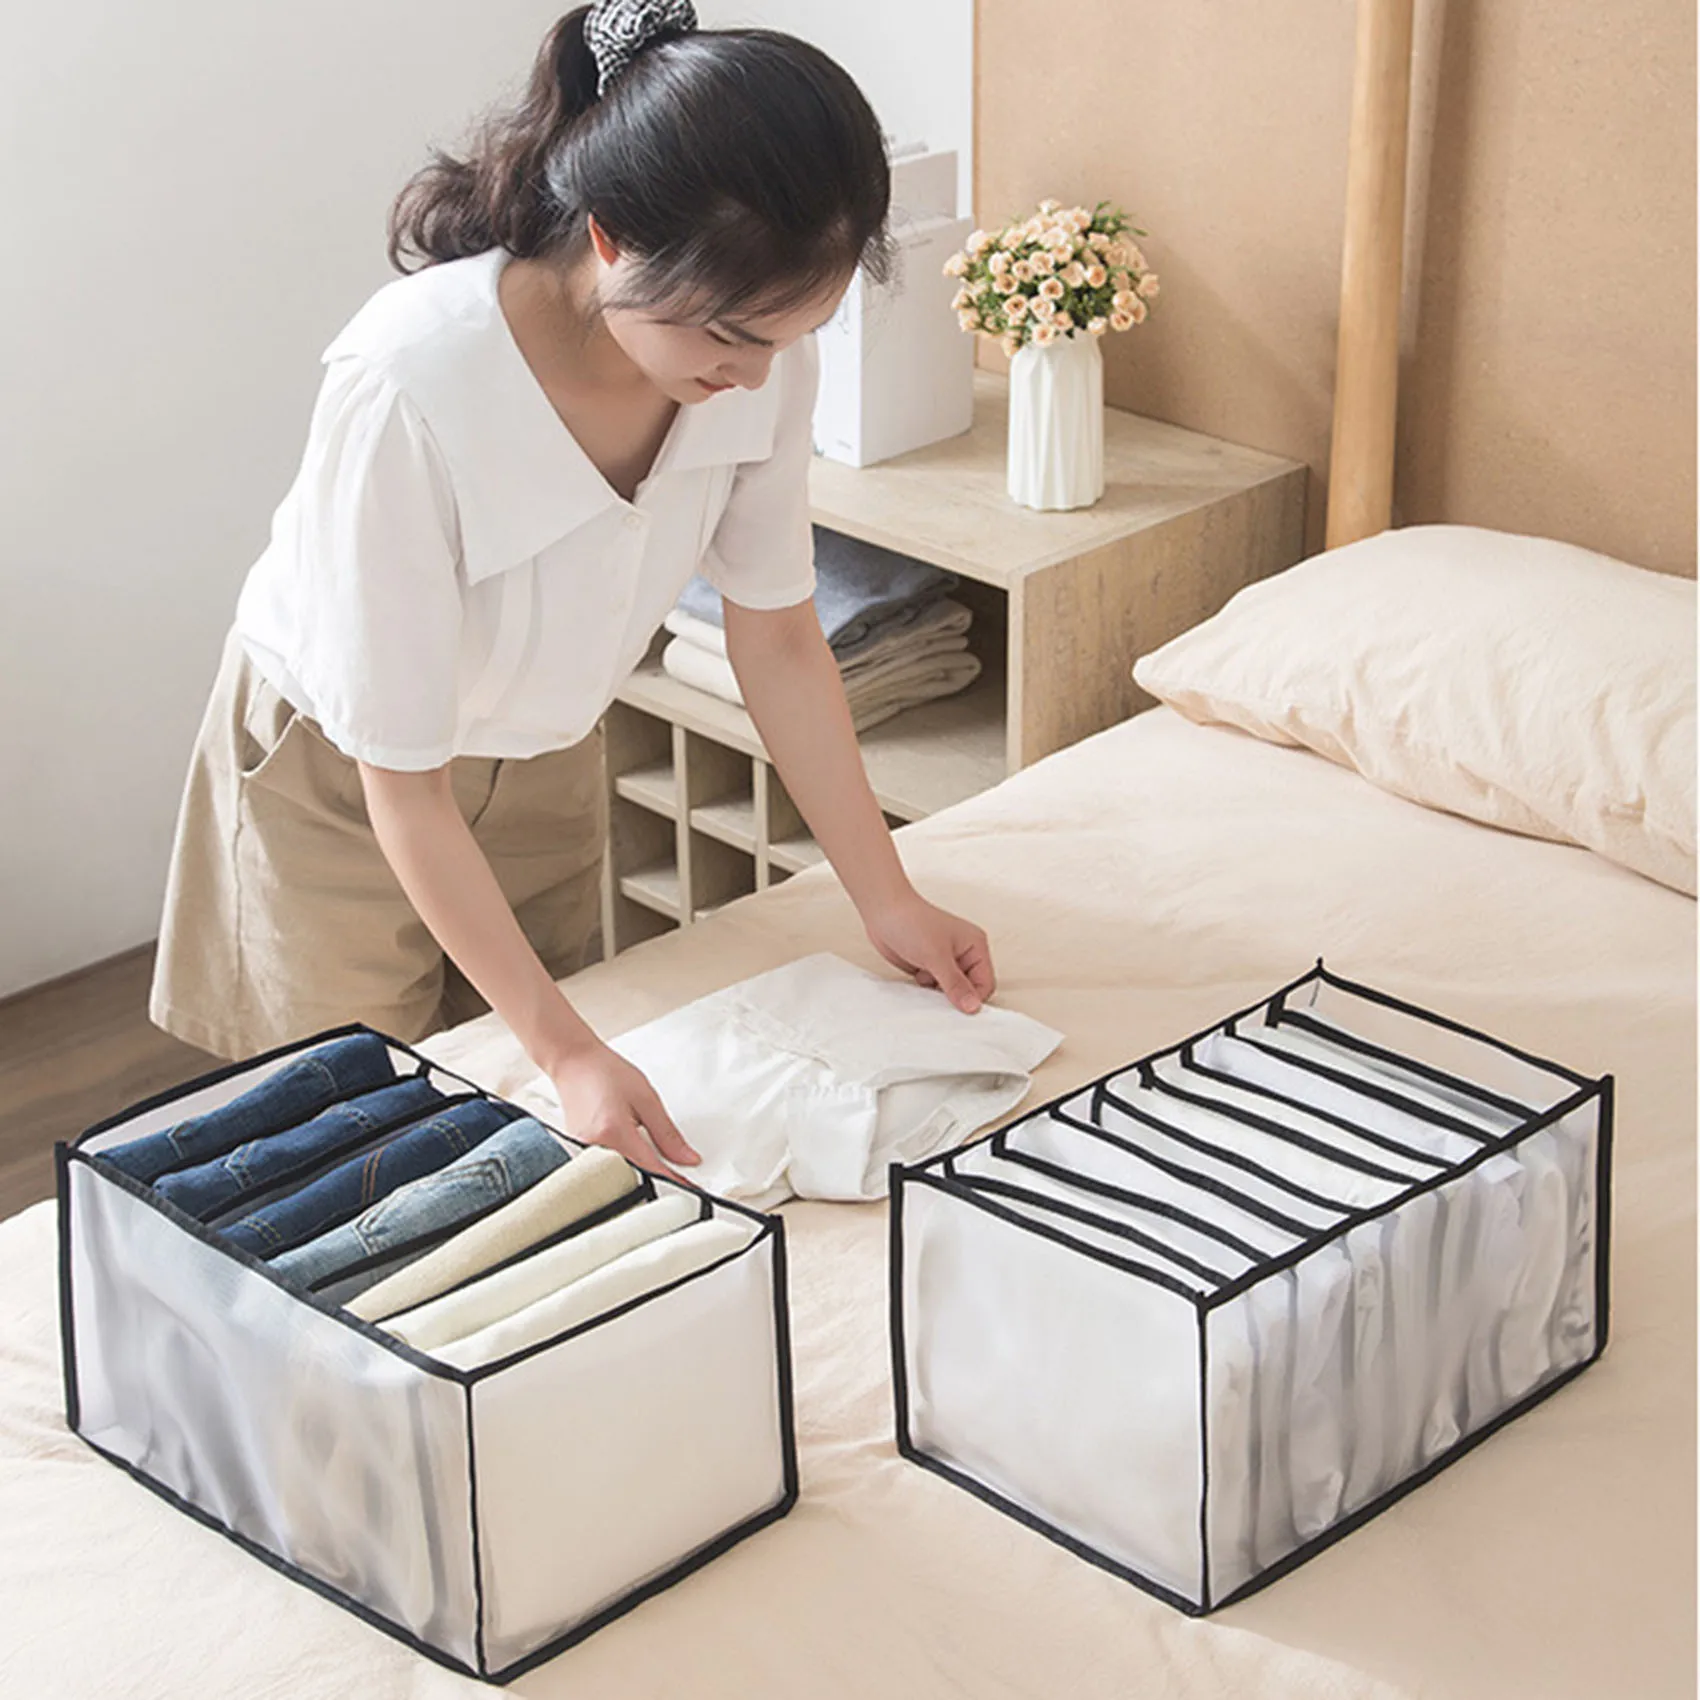 2023 Hot sell Wholesale T shirt Folding Board t Shirt Folder Clothes foldable Plastic fabric Laundry Room Clothes Organizer